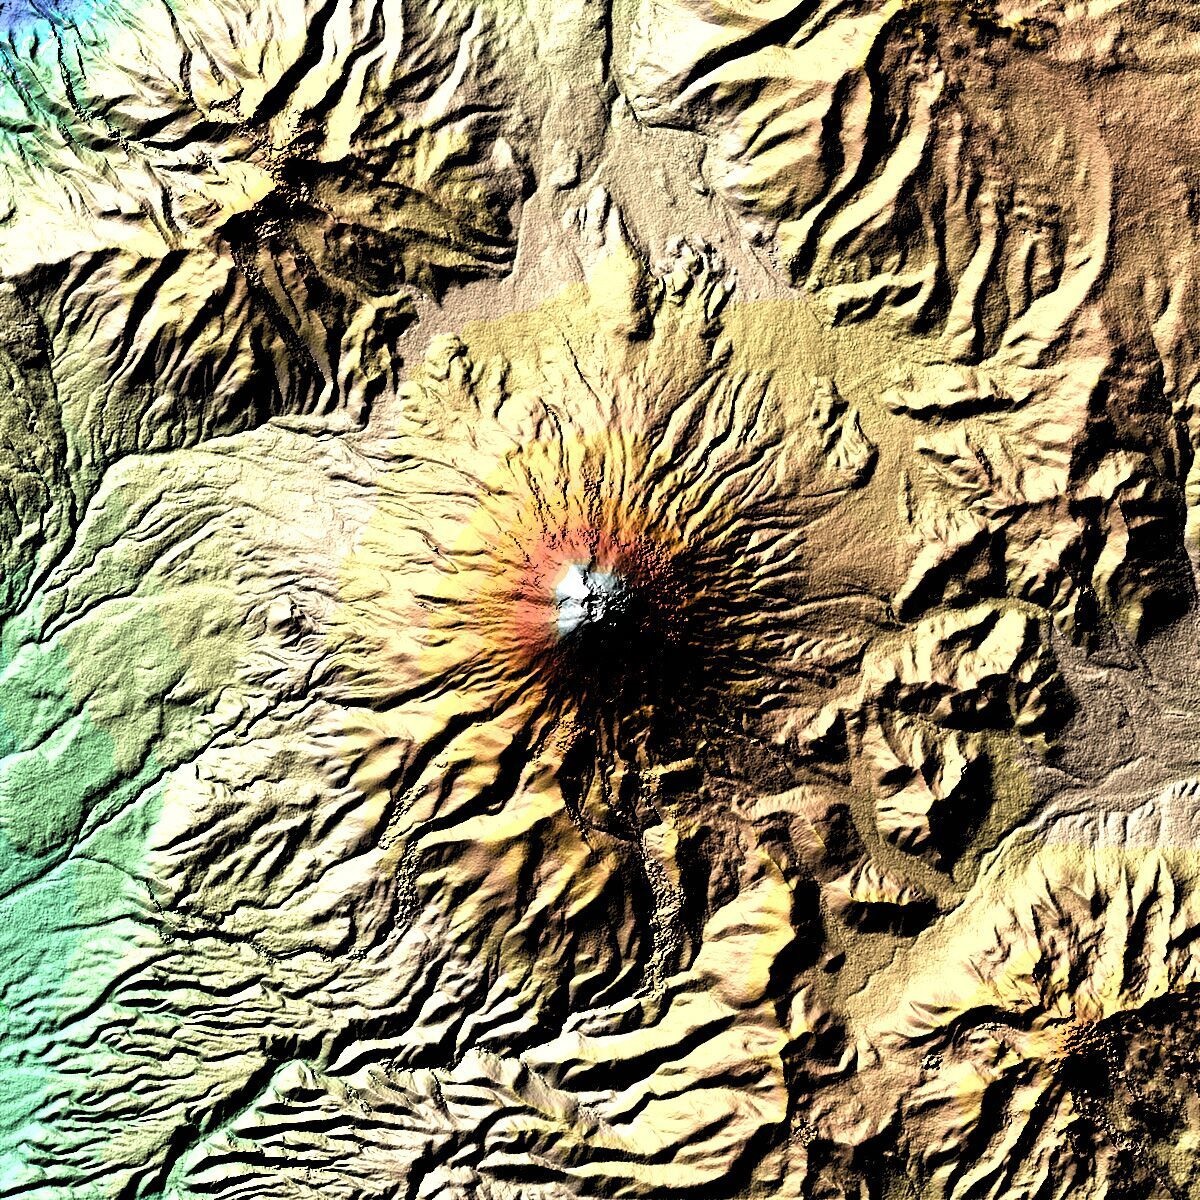 A digital elevation model of Cotopaxi shows the volcano’s inner and outer craters. The outer crater is 800 meters across. Image courtesy of NASA Earth Observatory. 